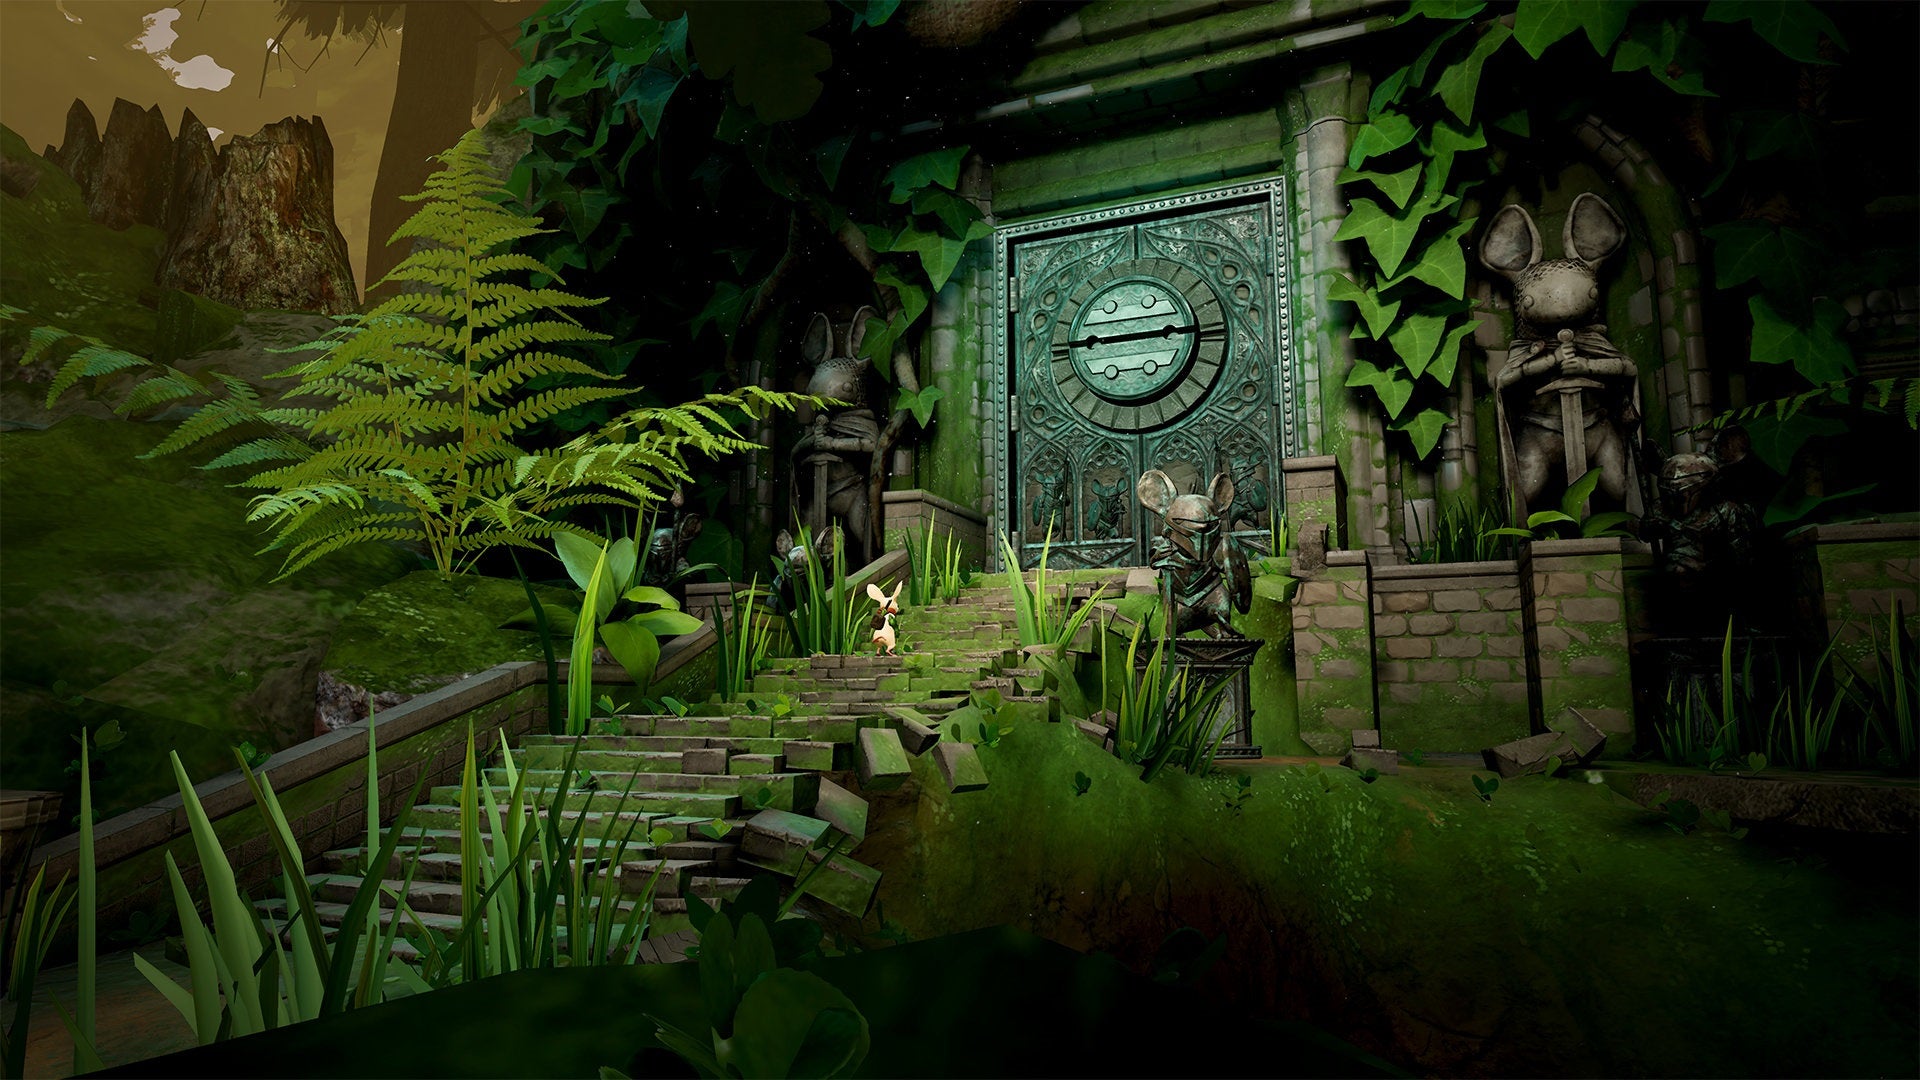 Screenshot of Moss game showing character in a forest environment.